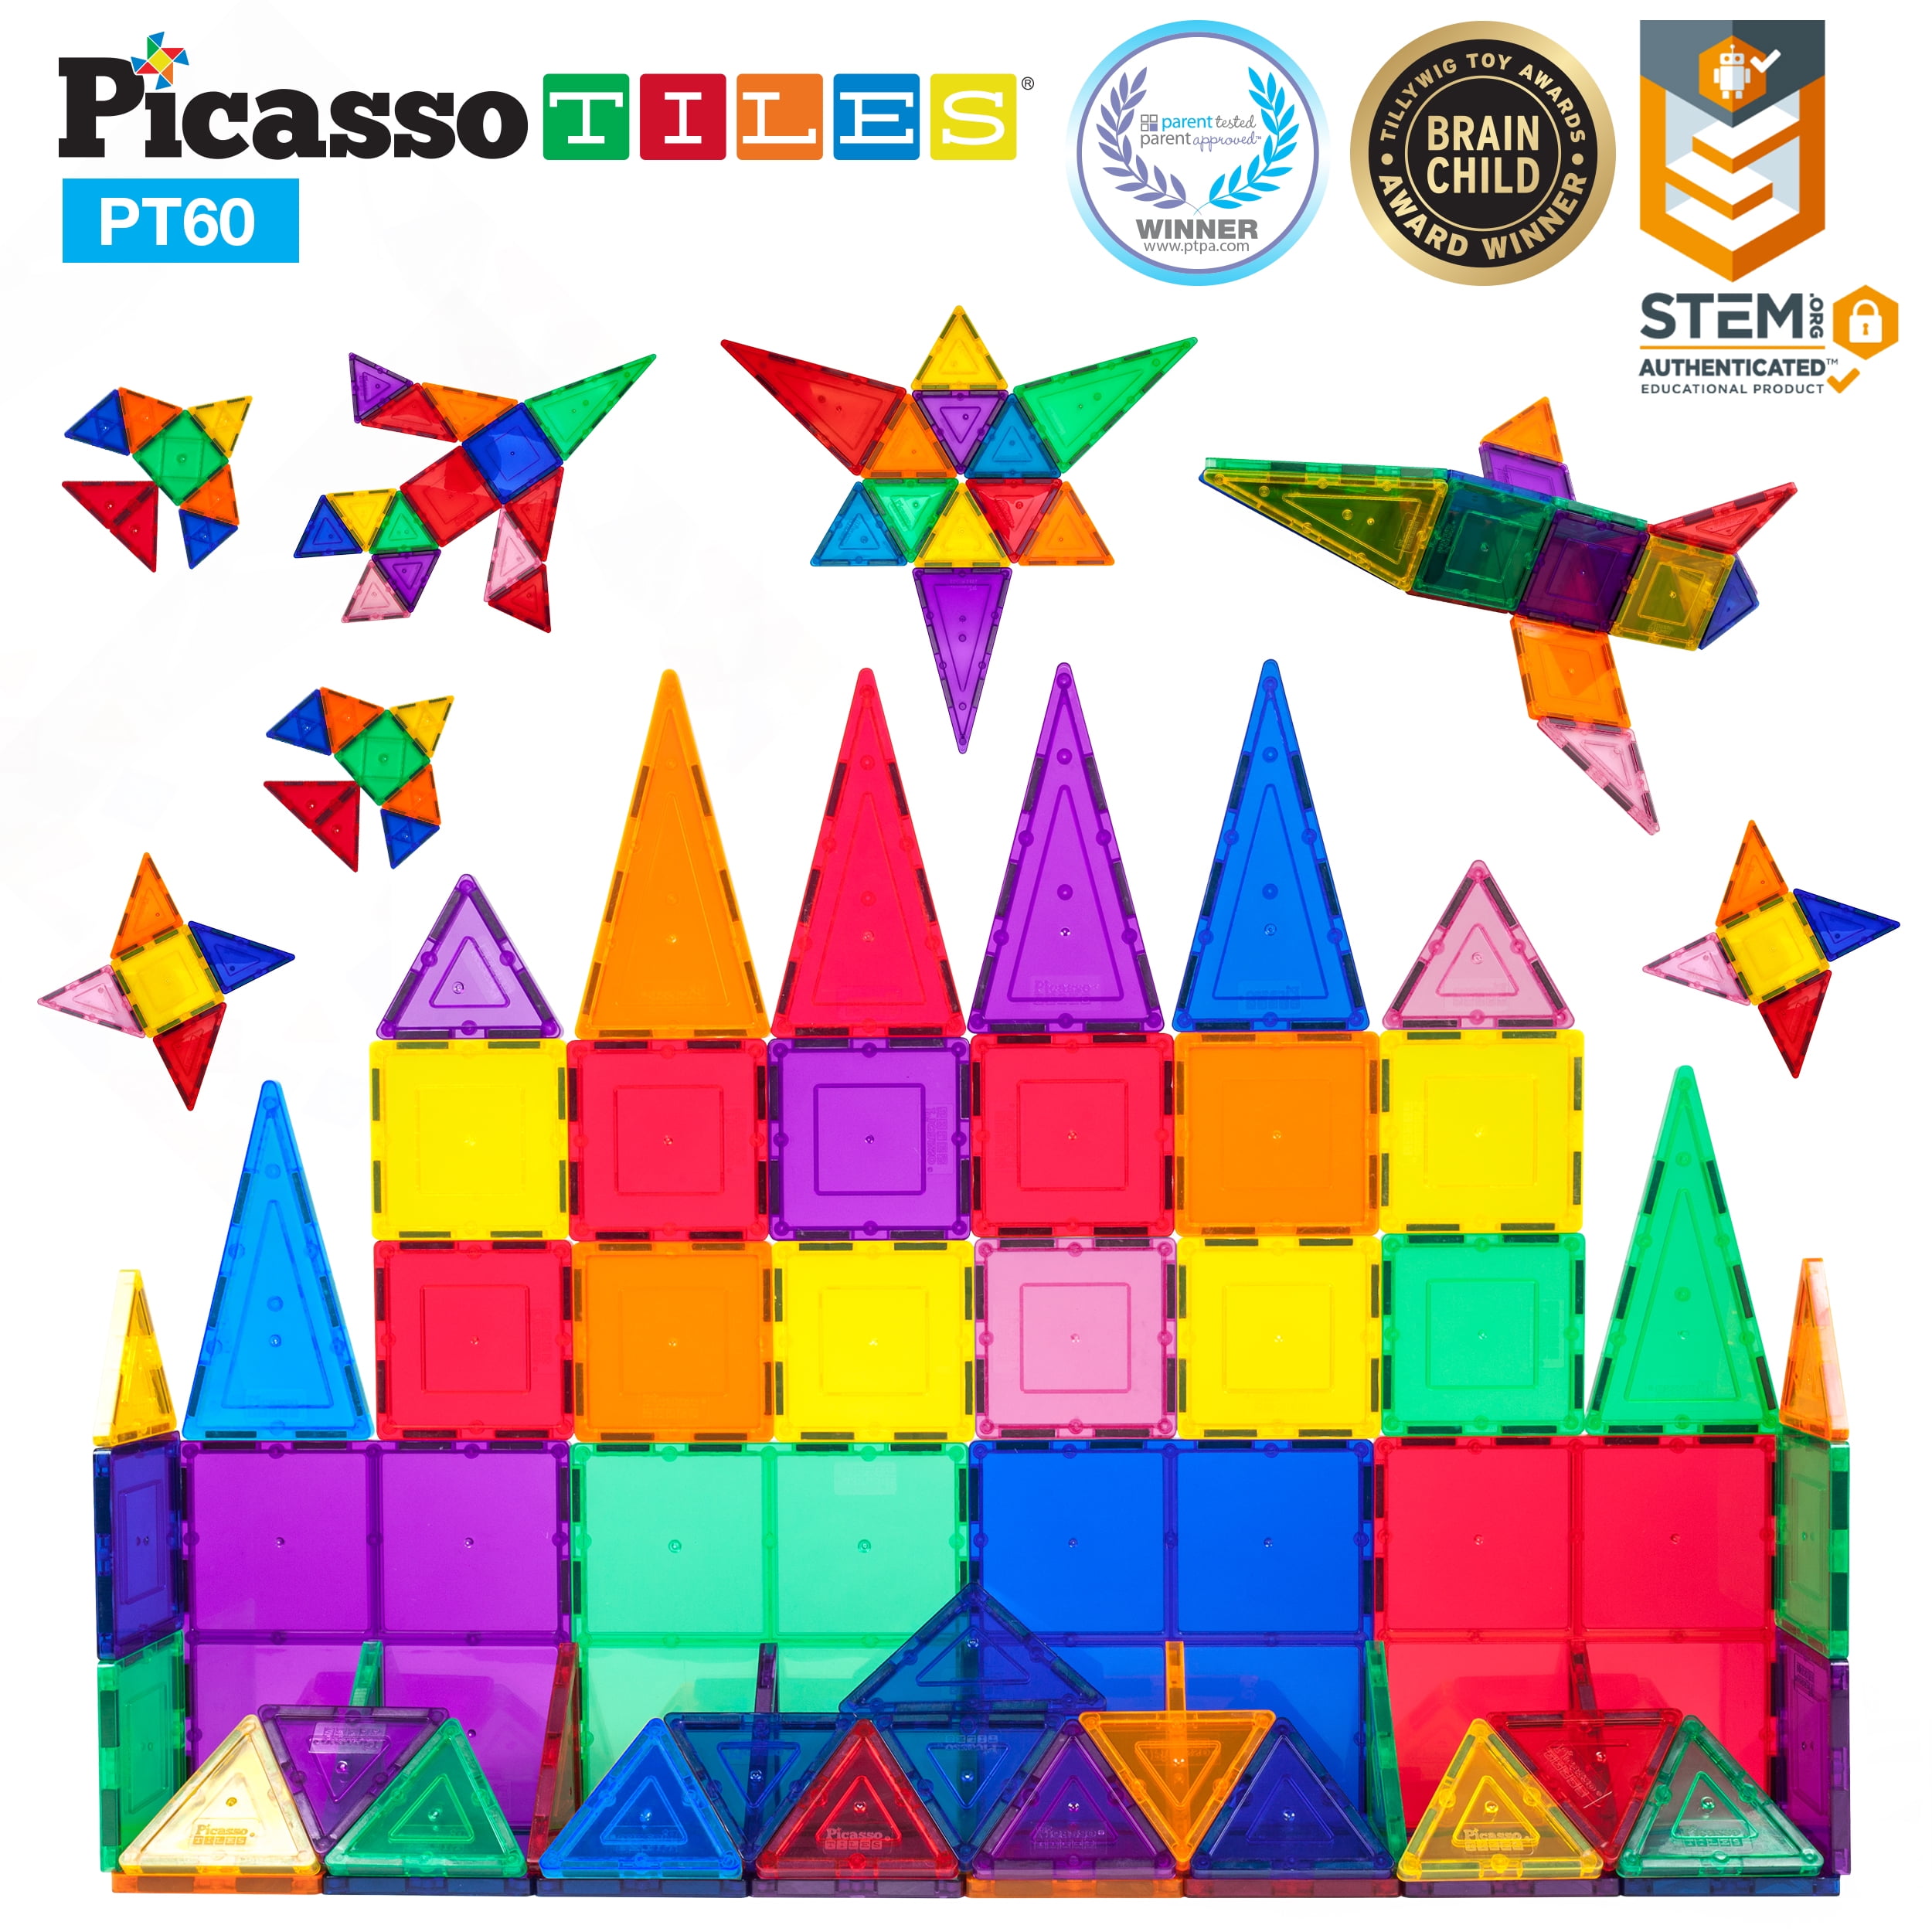 Picasso tiles NEW IN Magnet Tiles 100pc Clear Color 3D Magnetic Building Tiles 